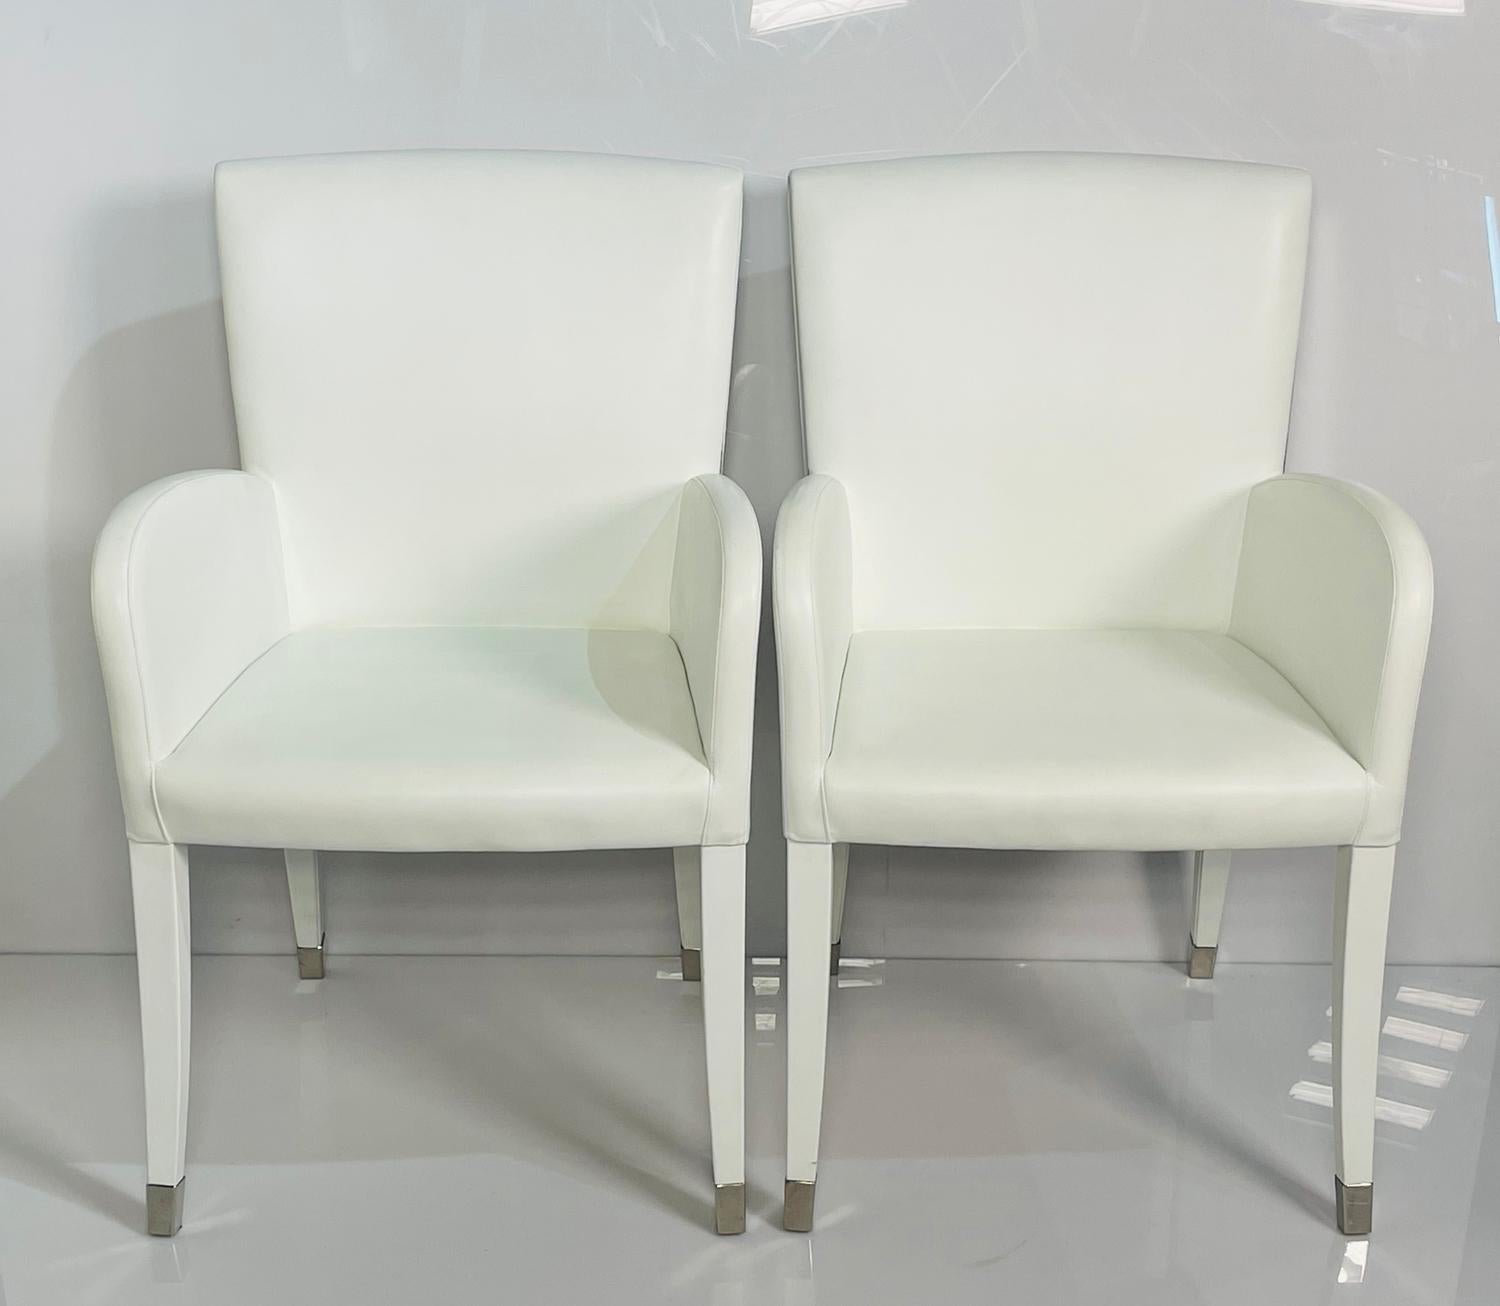 Pair of armchairs embossed in white leather and metal accents from the Elisa Collection, designed and manufactured by Fendi.

The chairs retains manufacturers label.

Measurements:
37 inches high x 23 inches wide x 23 inches deep x 19 inches